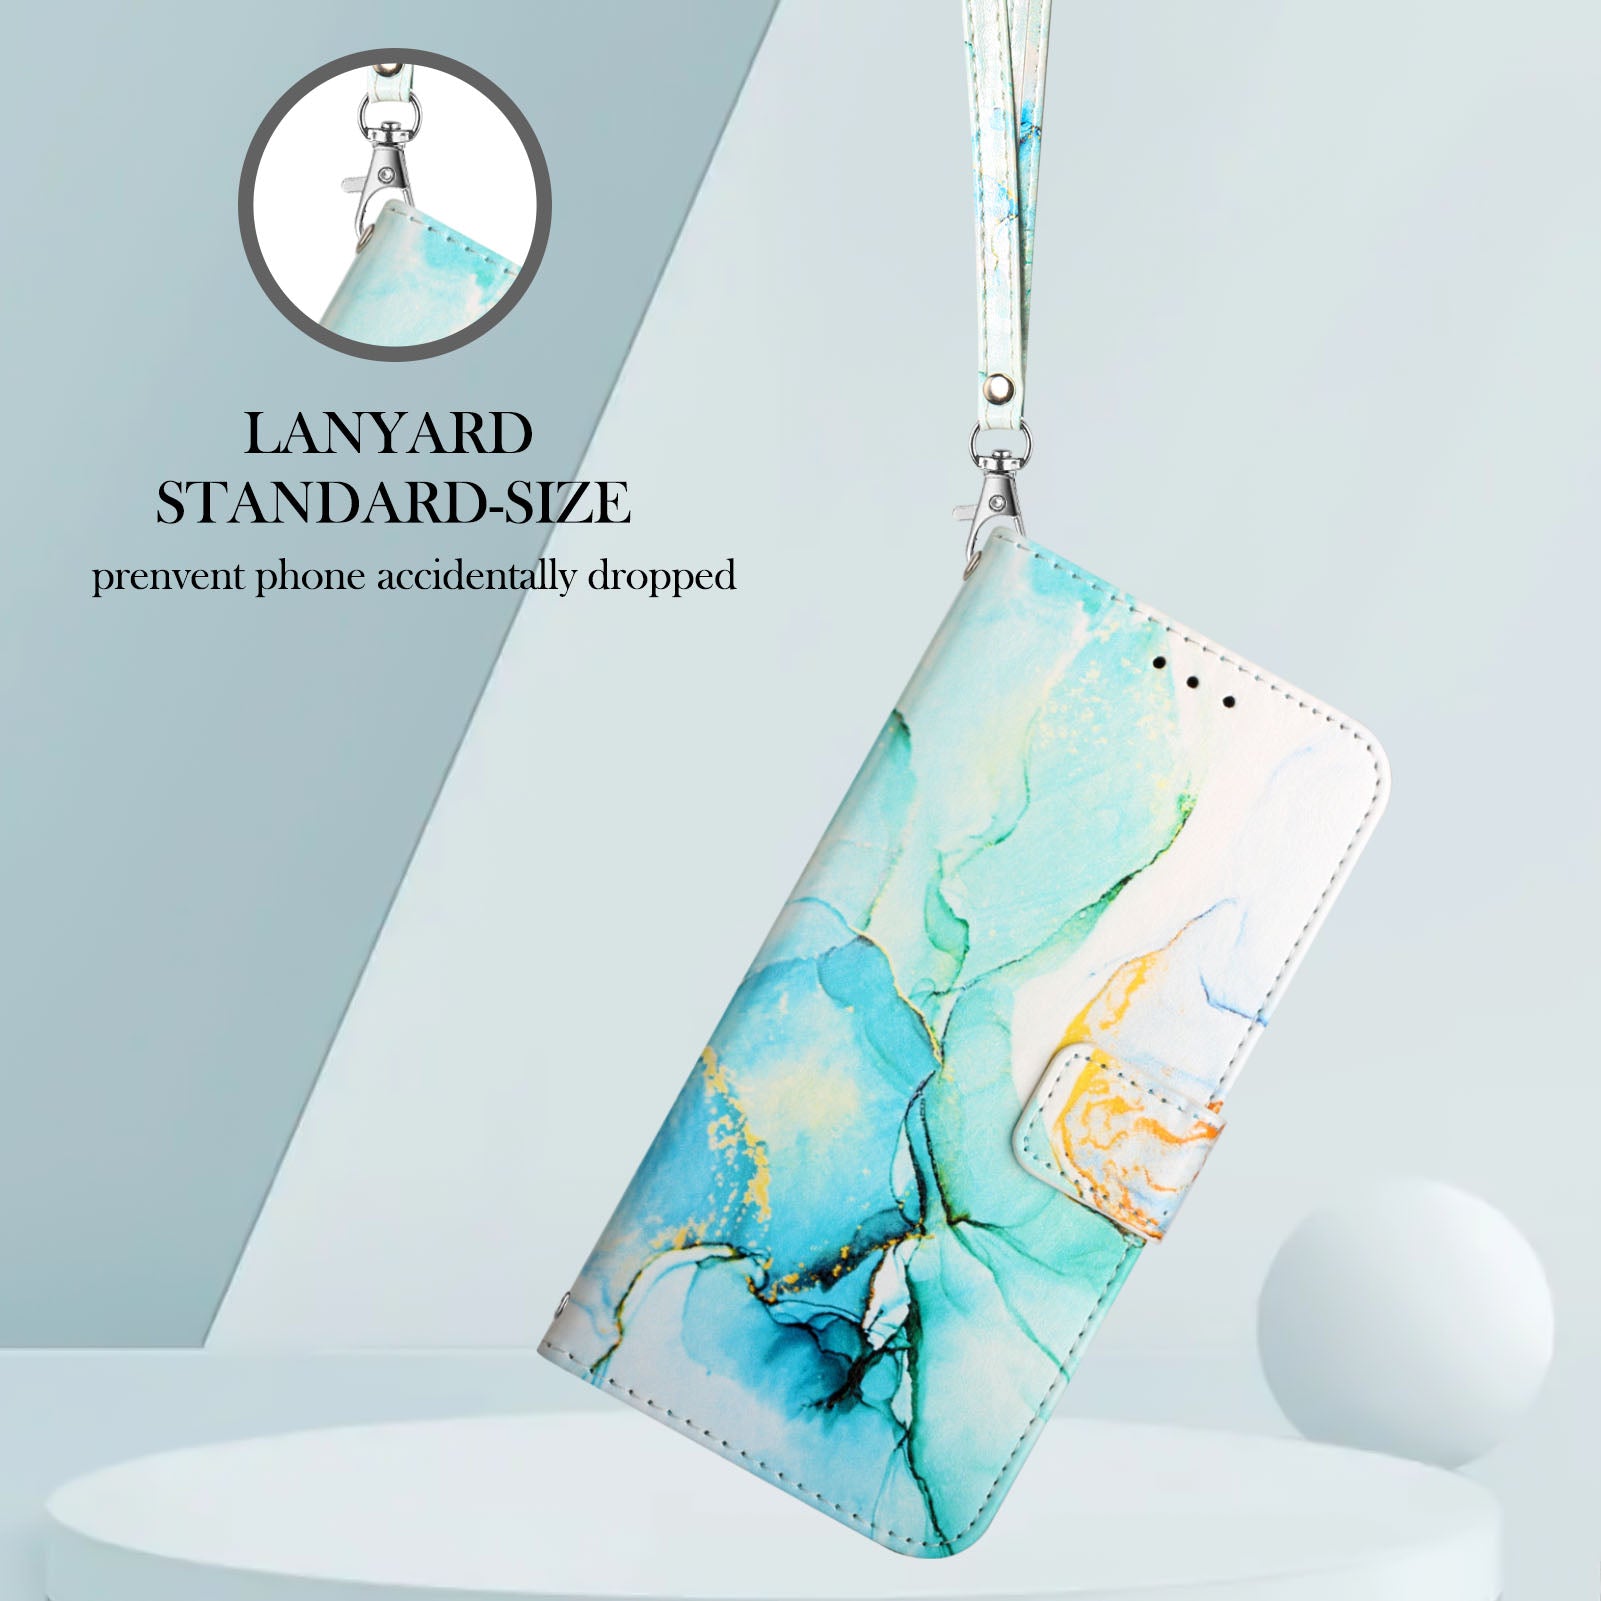 YB Pattern Printing Leather Series-5 For OnePlus 11 5G Marble Pattern Protective Cover Phone Case Wallet - Green 003